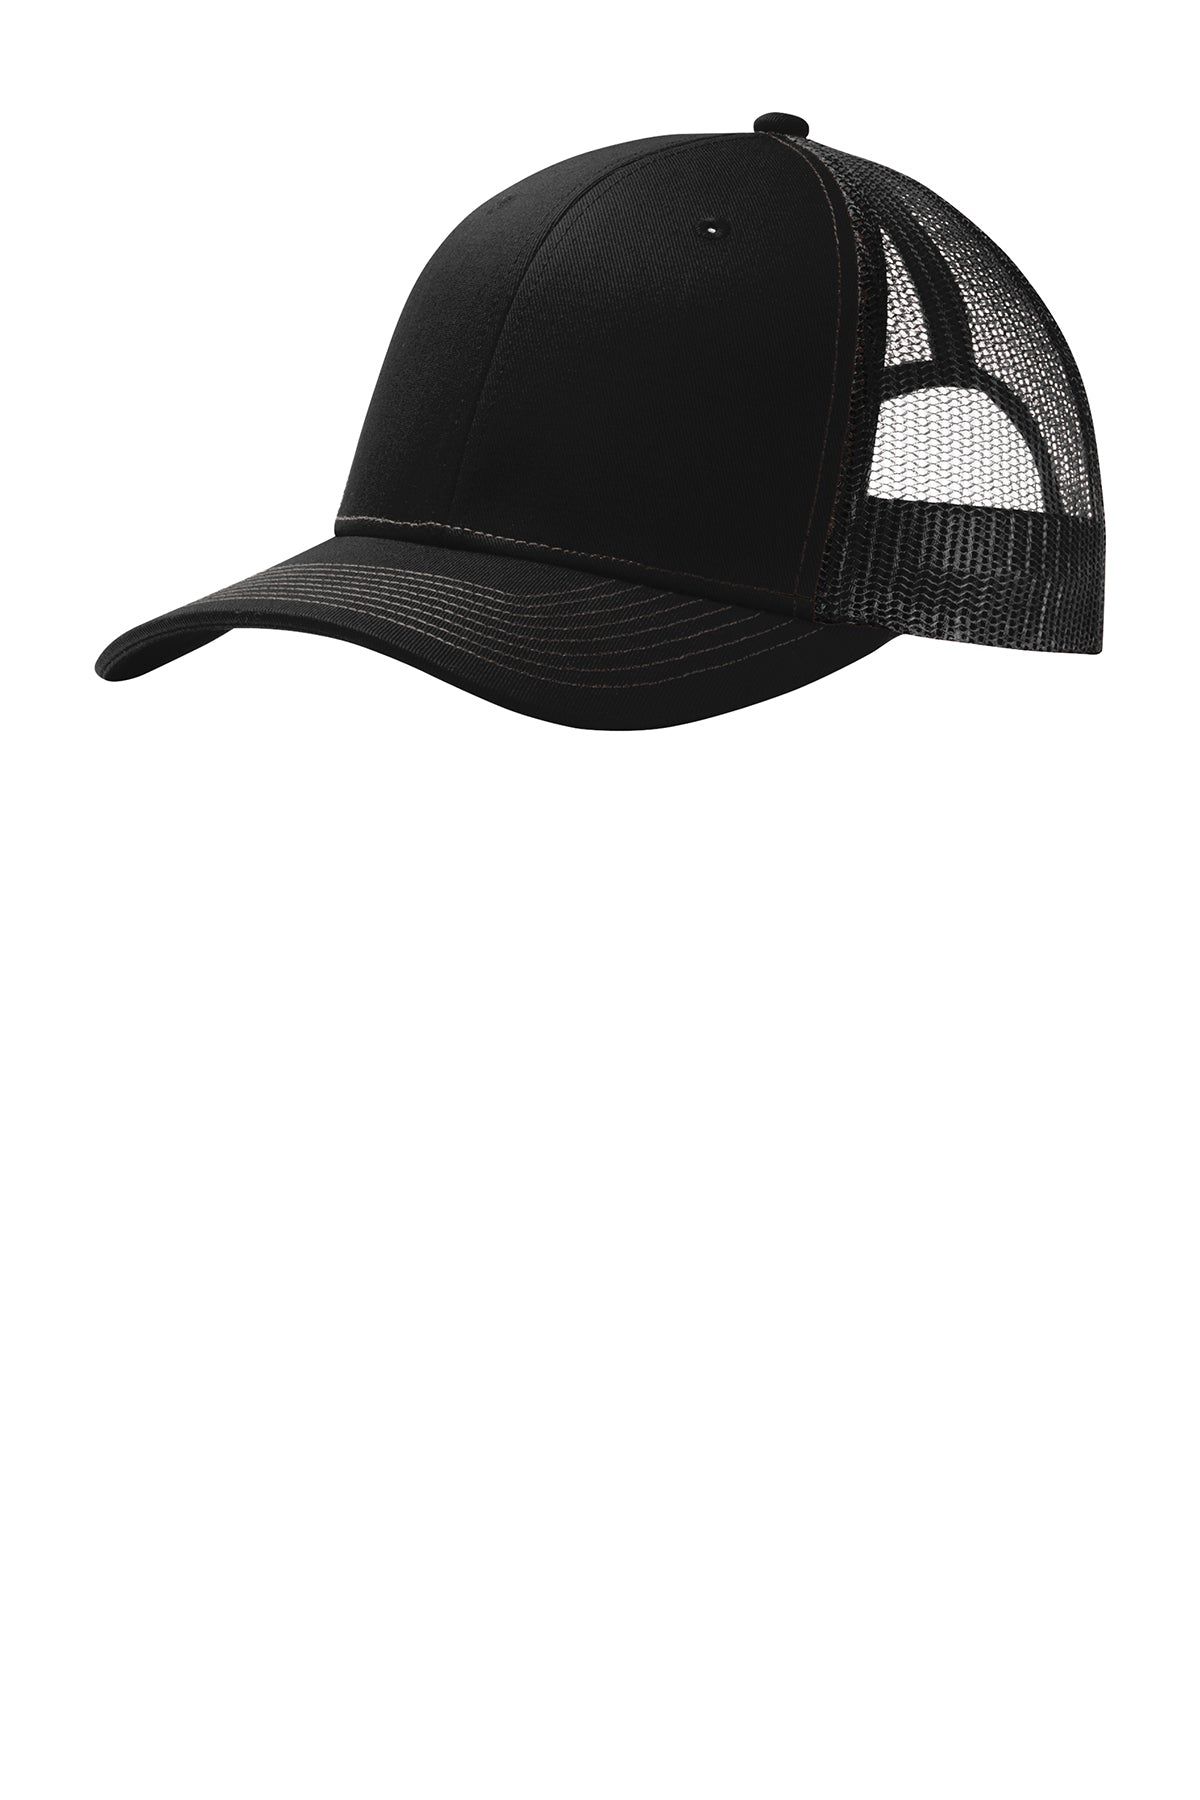 CG Chargers Black Embroidered Richardson 112 cap